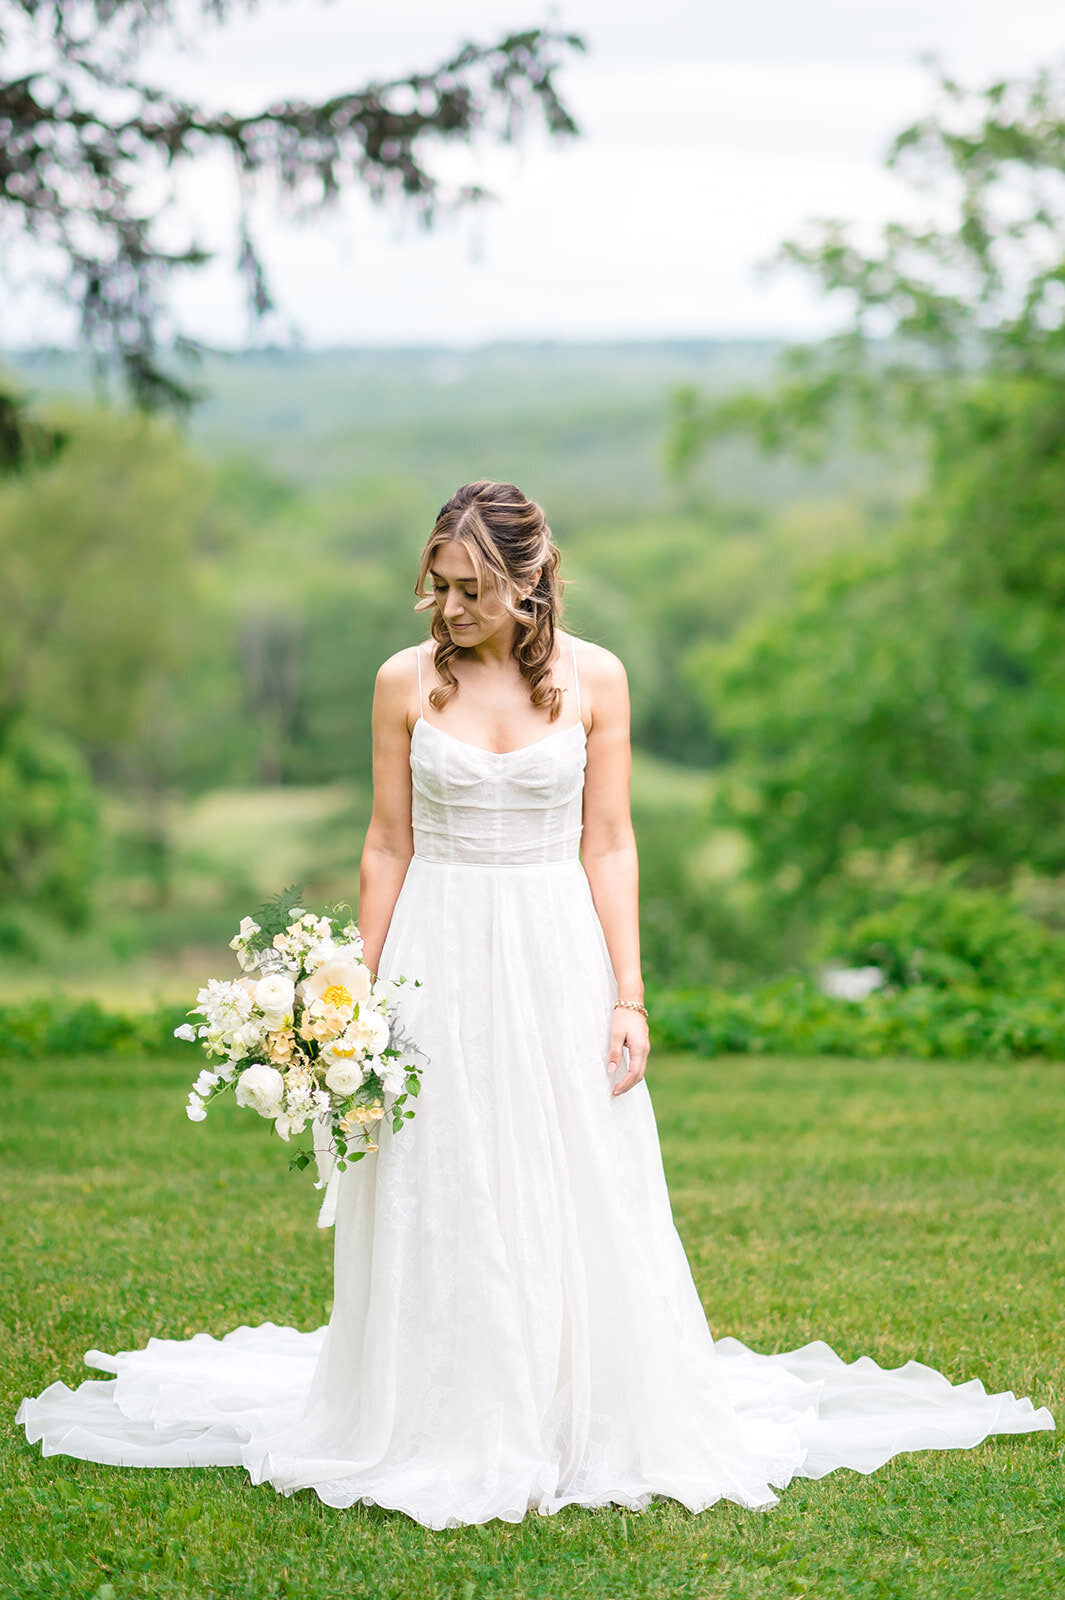 A bride in a strapless wedding dress holding a delicate bouquet stands in a lush green field with a scenic view of rolling hills in the background